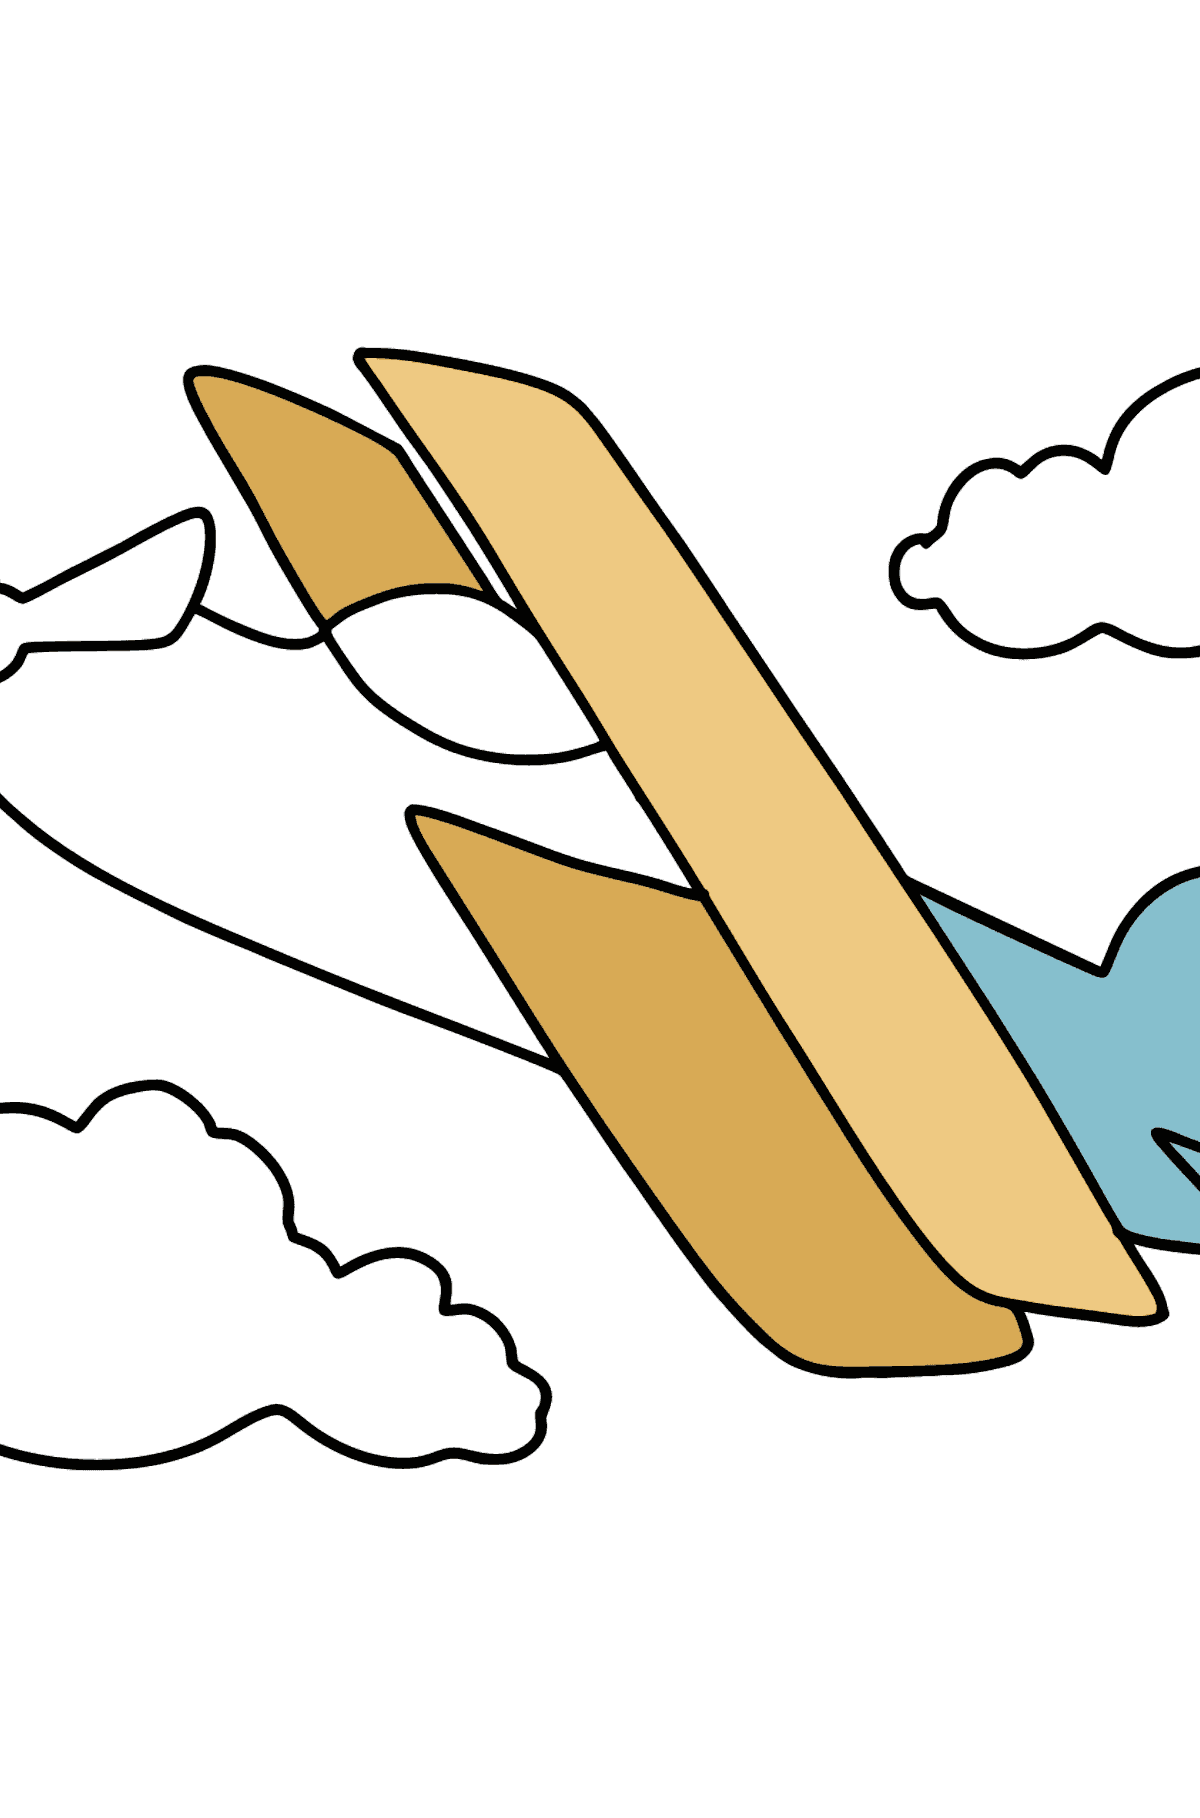 Simple Airplane coloring page - Coloring Pages for Kids